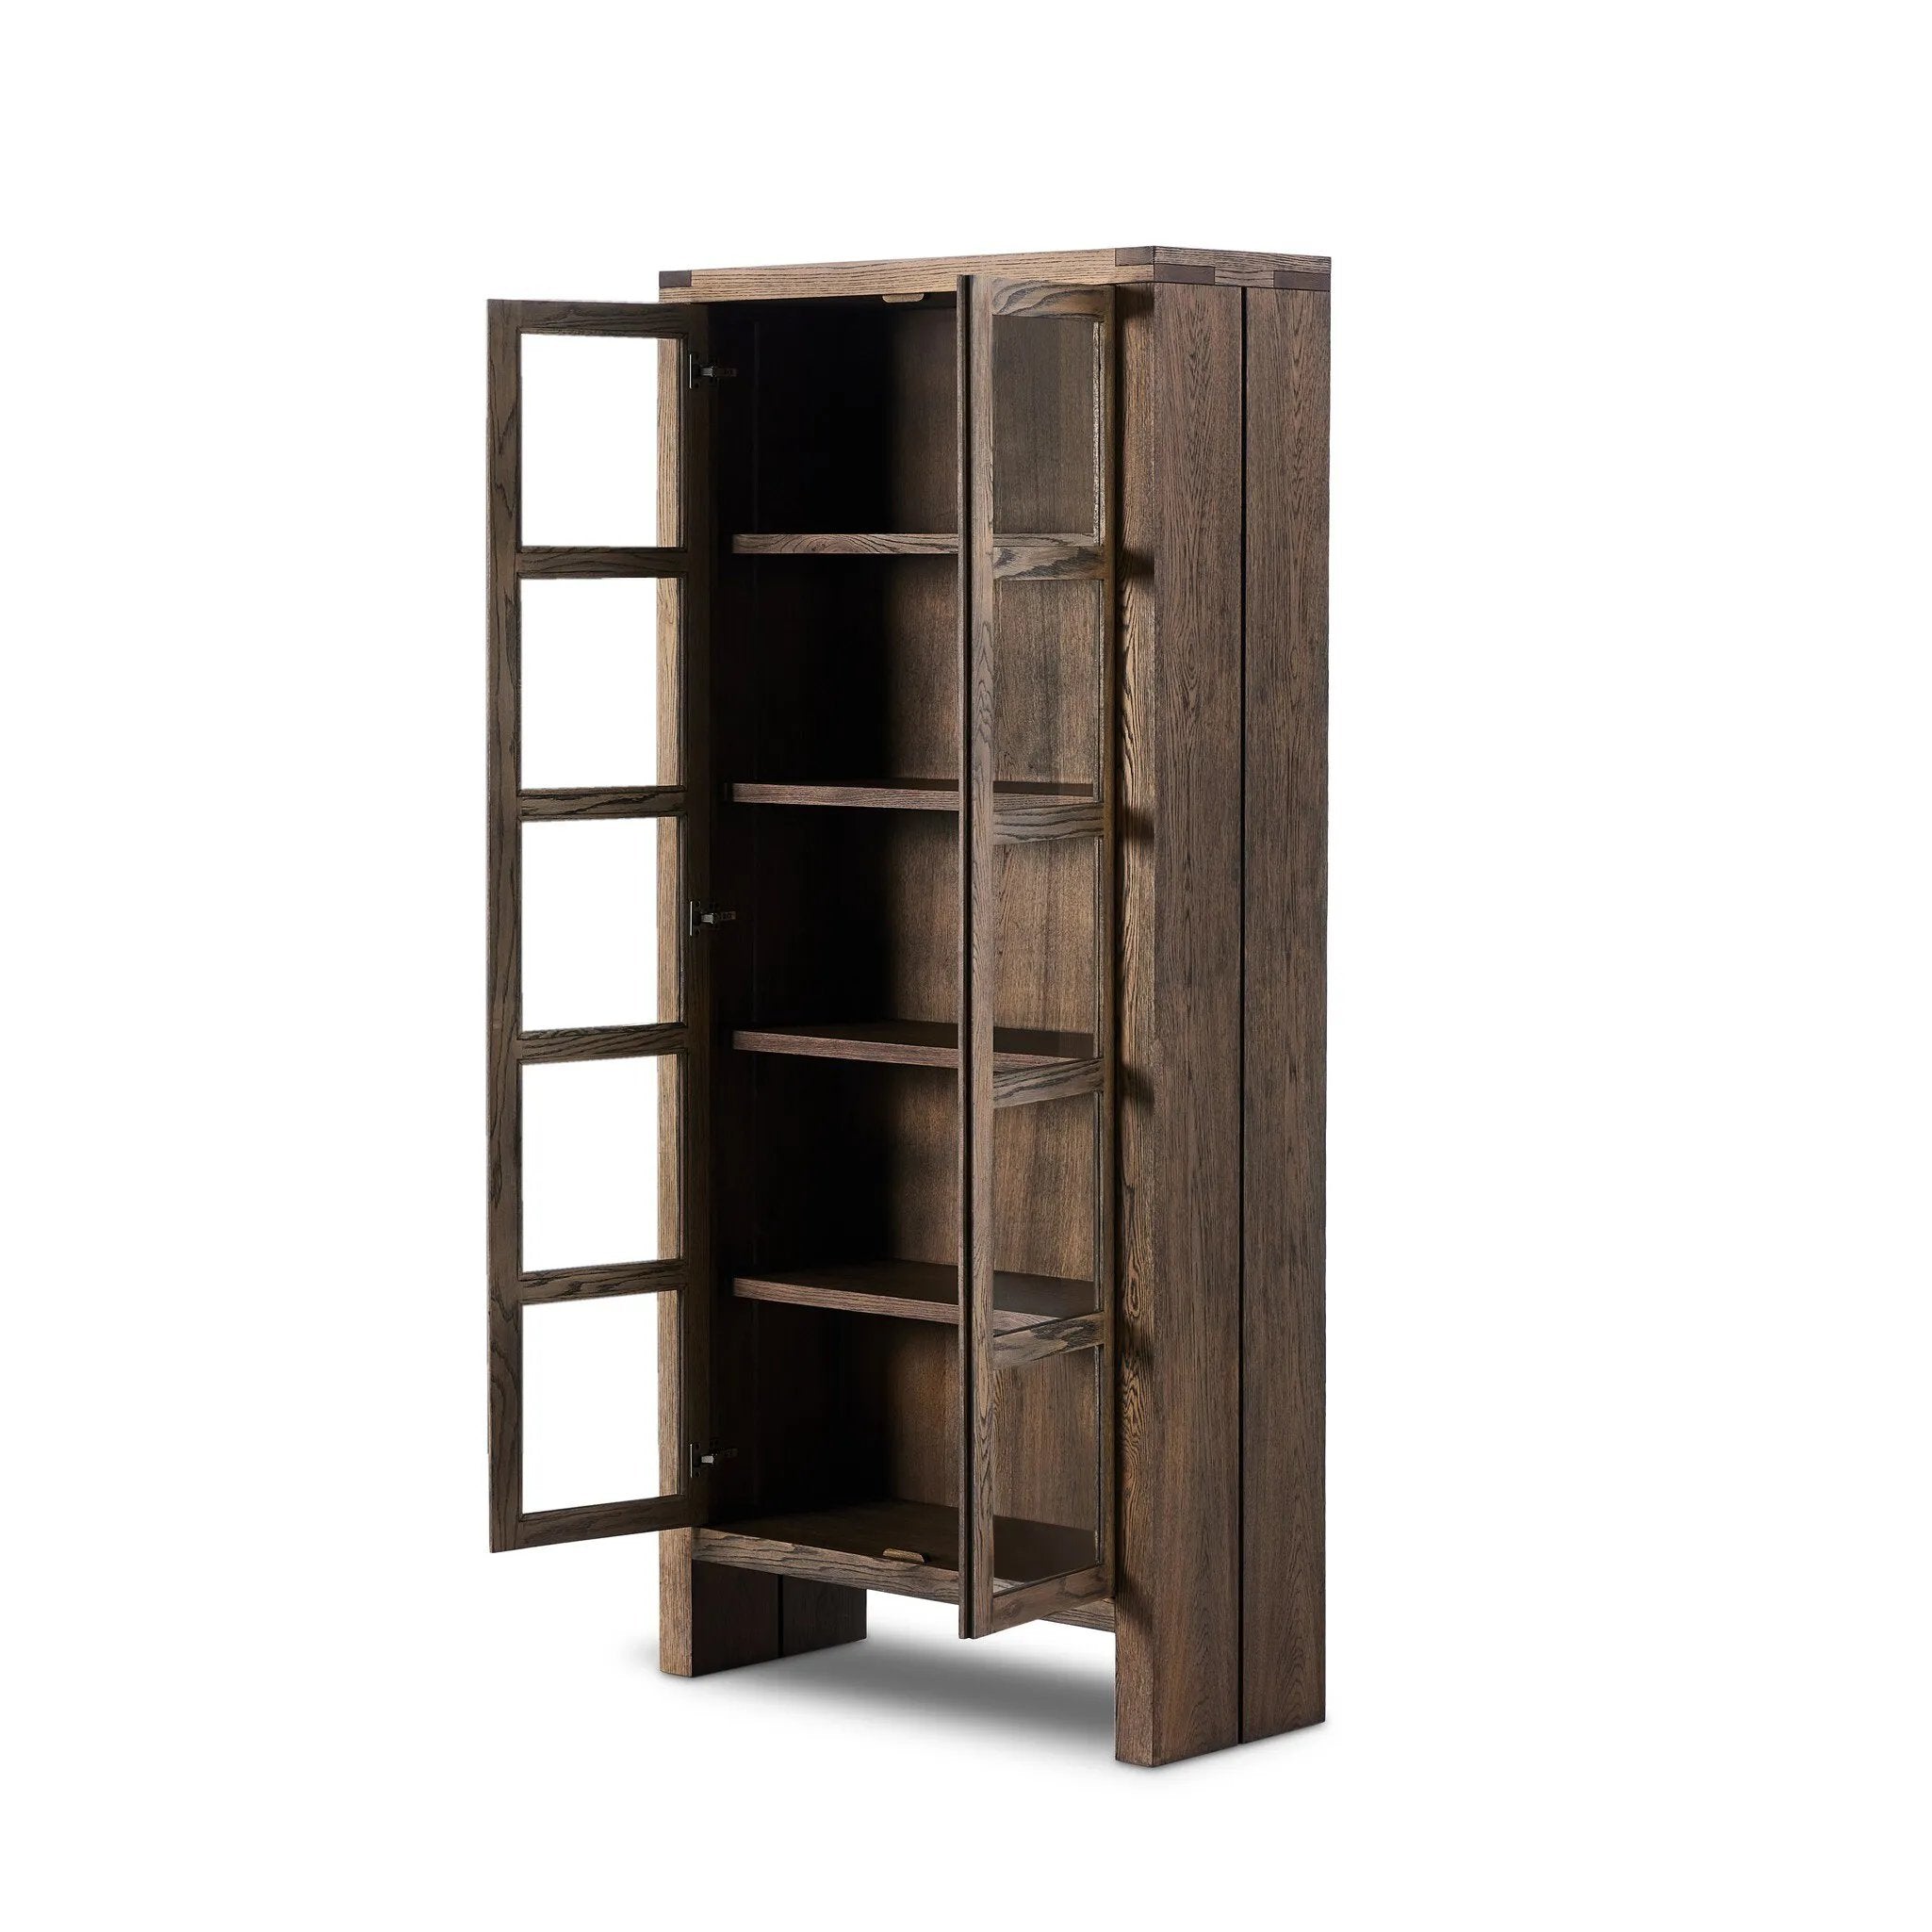 This minimal-inspired bookcase is crafted from a mix of solid oak and worn oak veneer. Featuring glass-front doors and spacious shelves for storage and display.Collection: Bennet Amethyst Home provides interior design, new home construction design consulting, vintage area rugs, and lighting in the Dallas metro area.